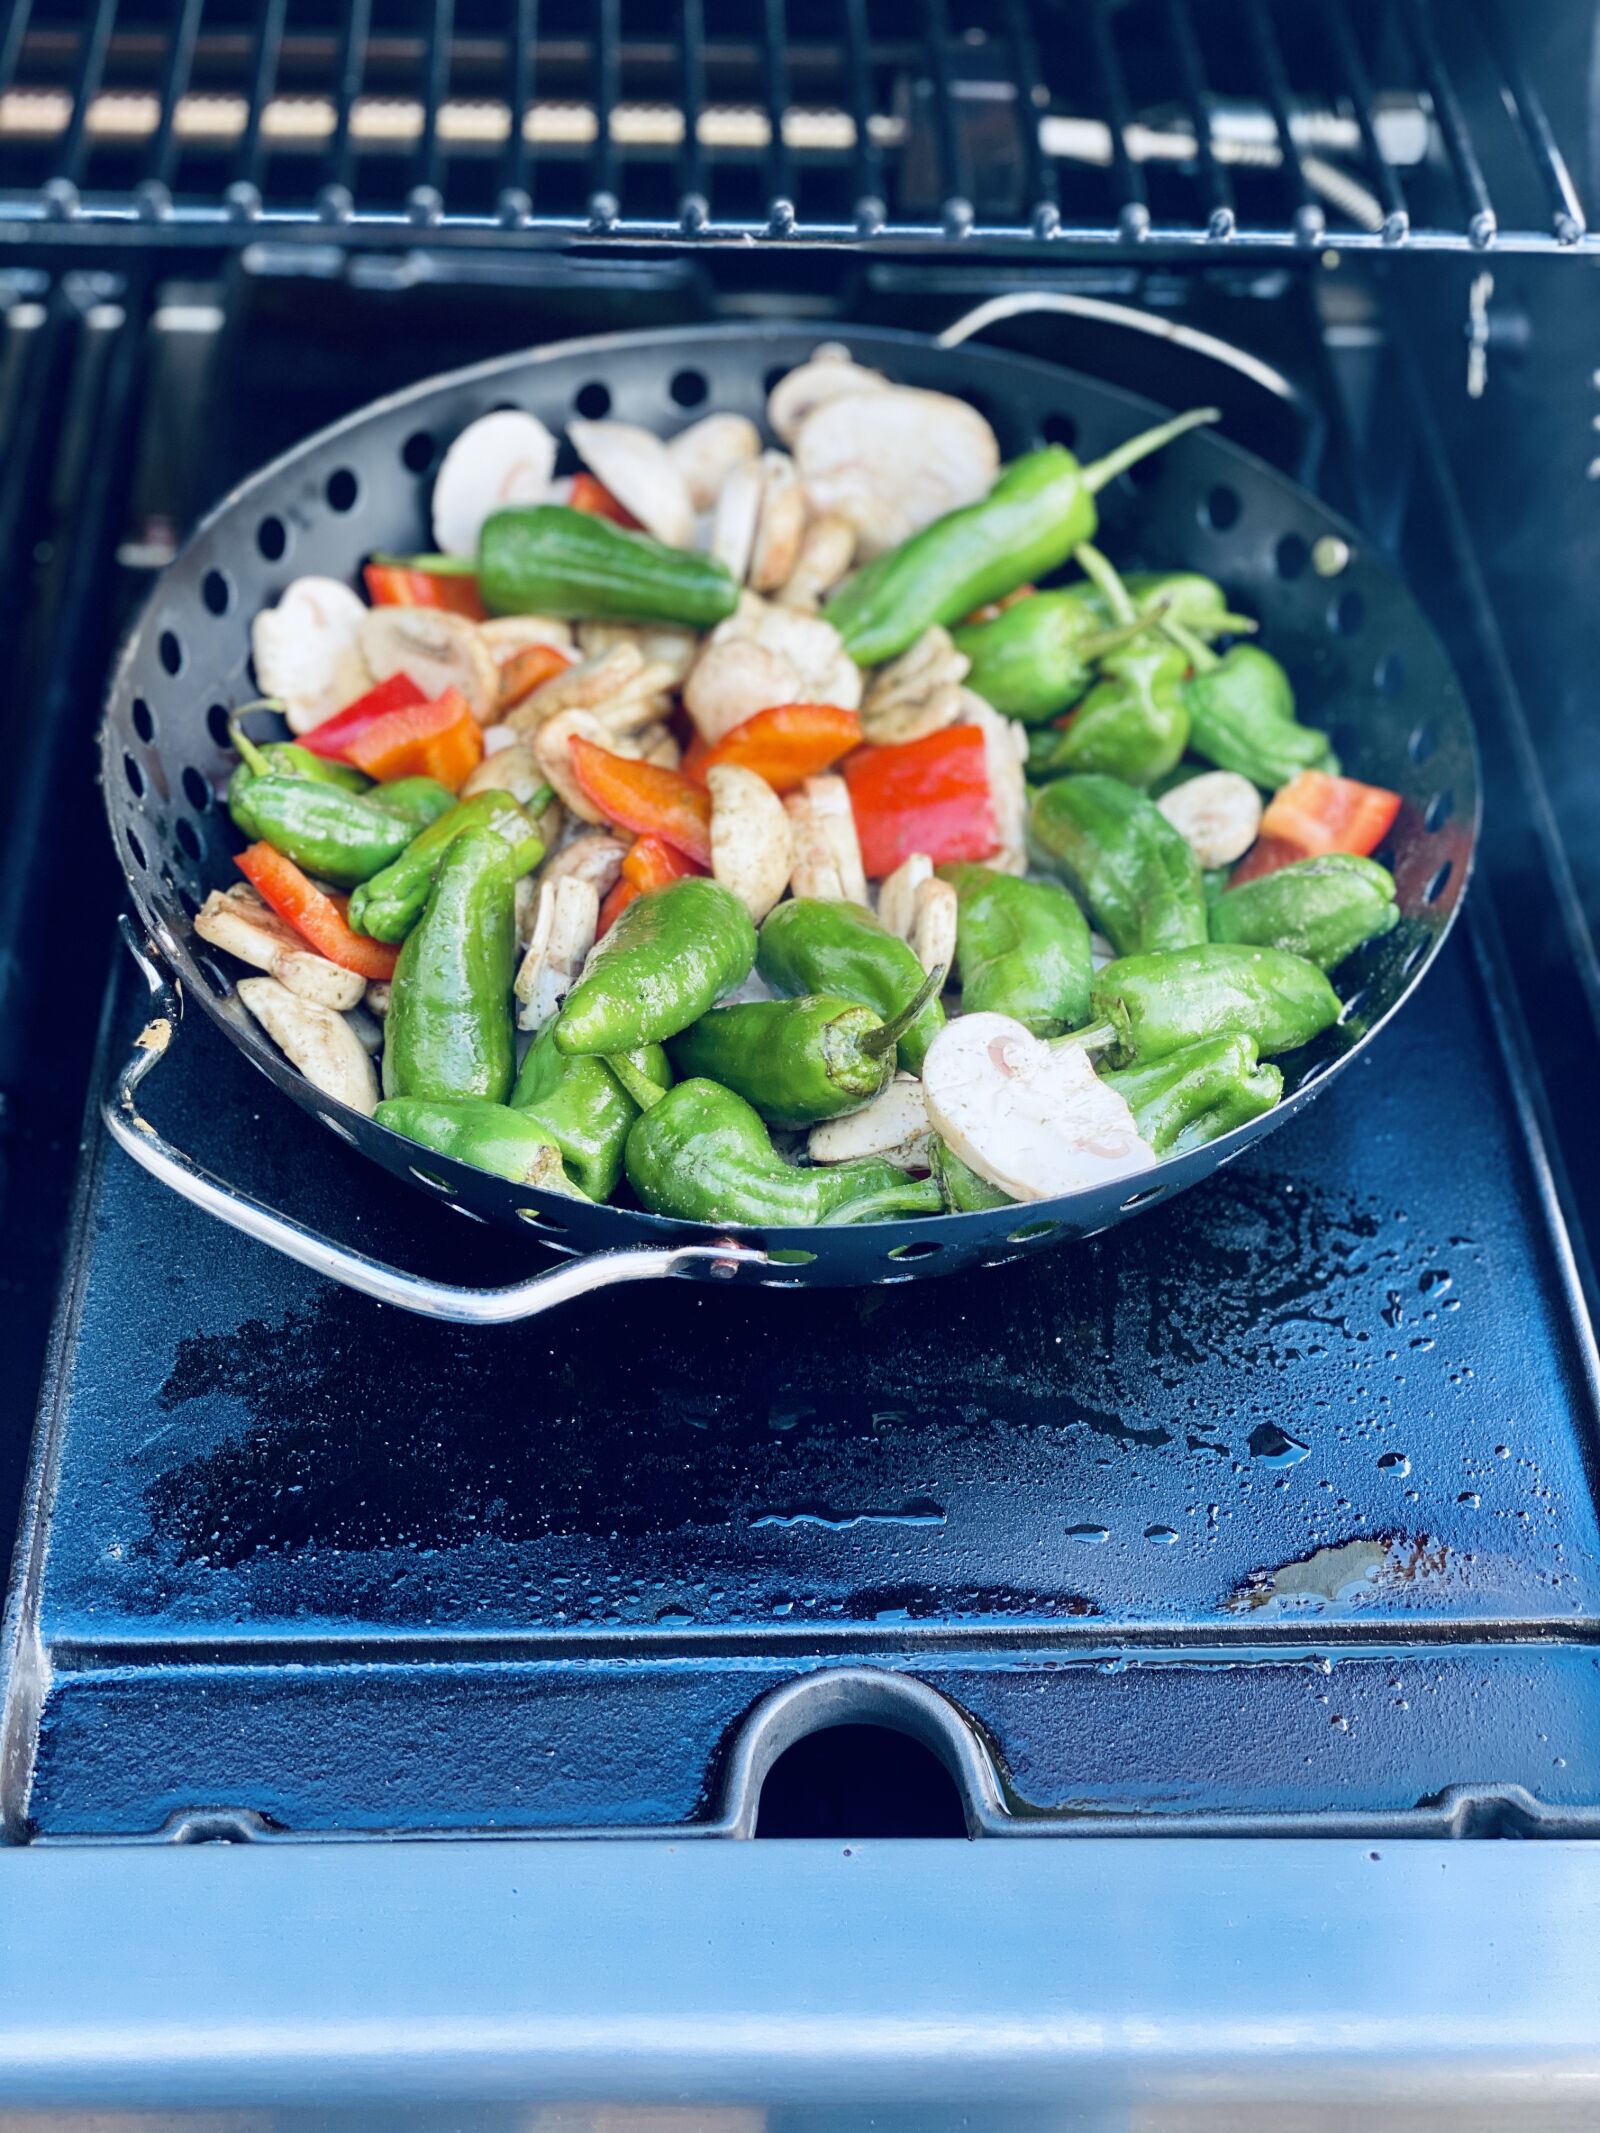 iPhone 11 Pro back dual camera 6mm f/2 sample photo. Barbecue, vegetables, vegetable pan photography